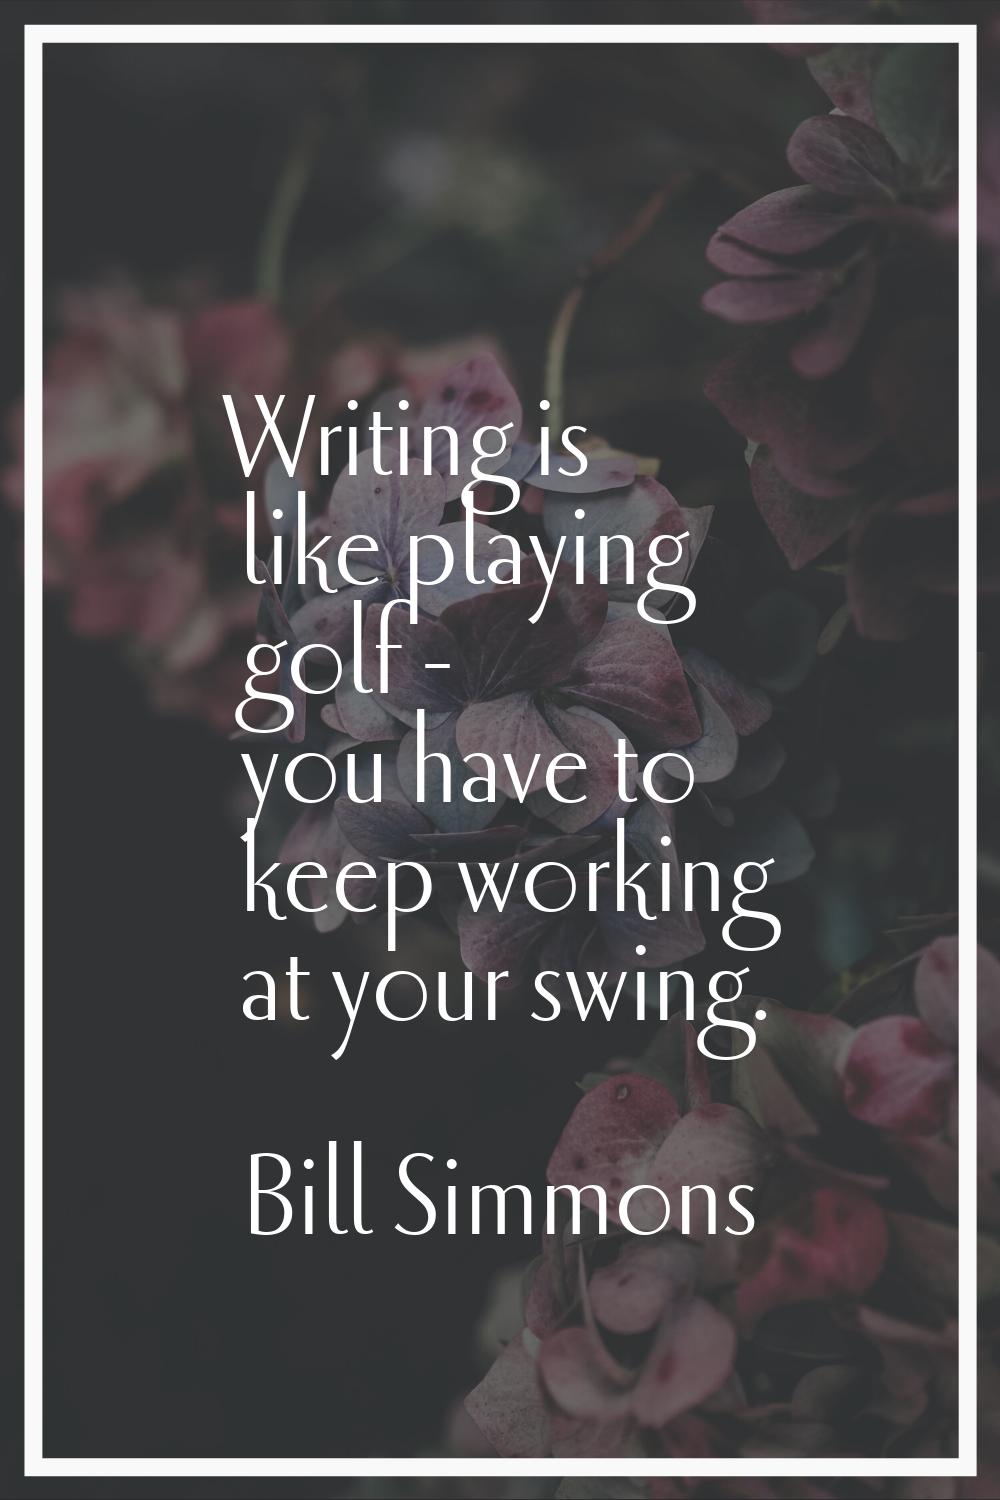 Writing is like playing golf - you have to keep working at your swing.